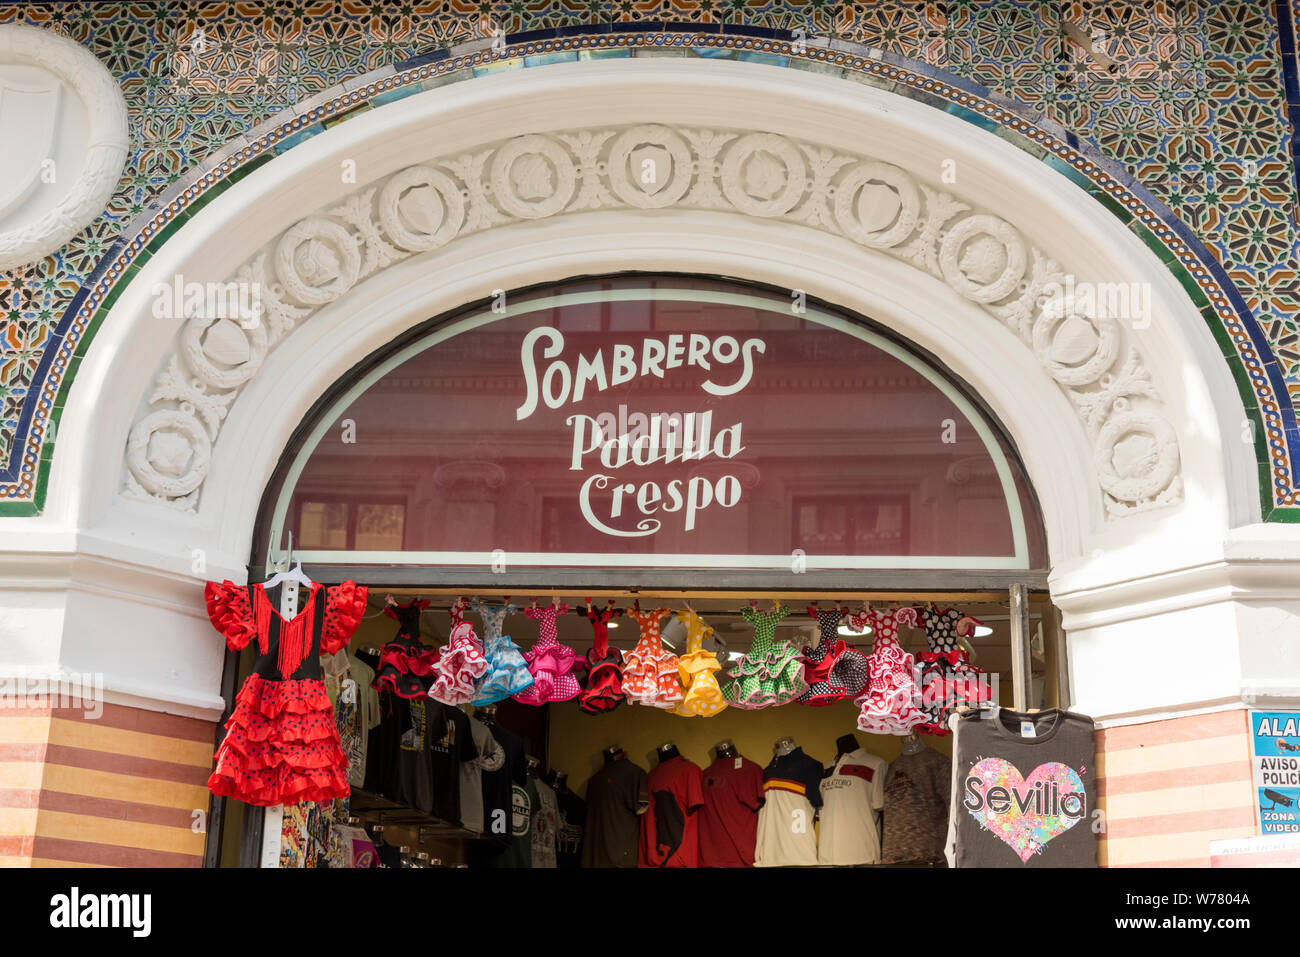 The ornate doorway and entrance to the Sombreros Padilla Crespo shop in Seville Spain Stock Photo